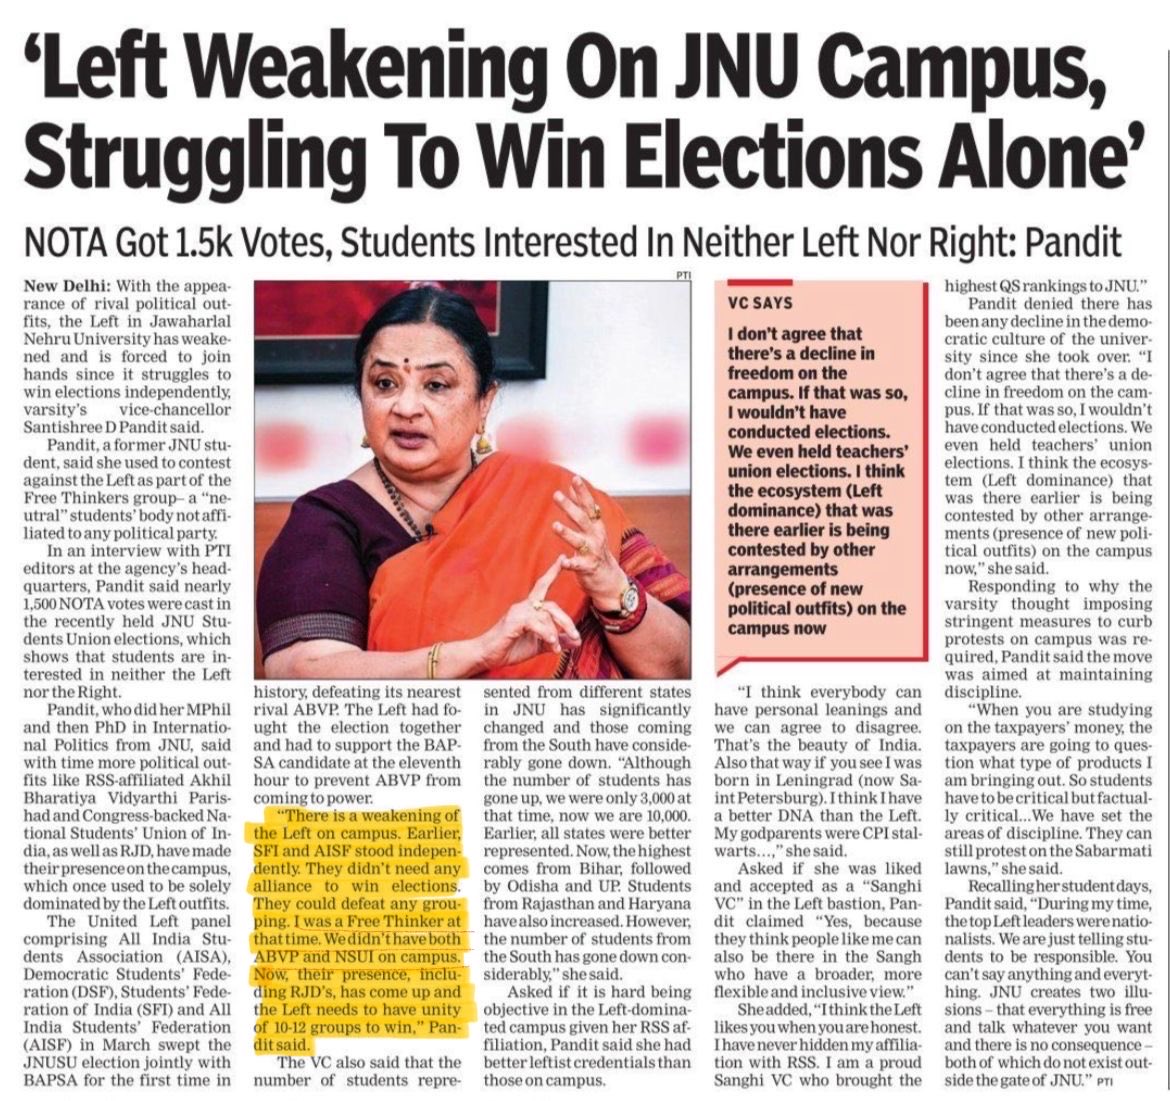 NOTA on all posts combined were around 1.5k. At least JNU VC should stand on facts. JNU gave overwhelming support to ABVP, as our vote % grew to about 40%. ABVP will win all 4 seats in the upcoming JNUSU elections. #ABVP